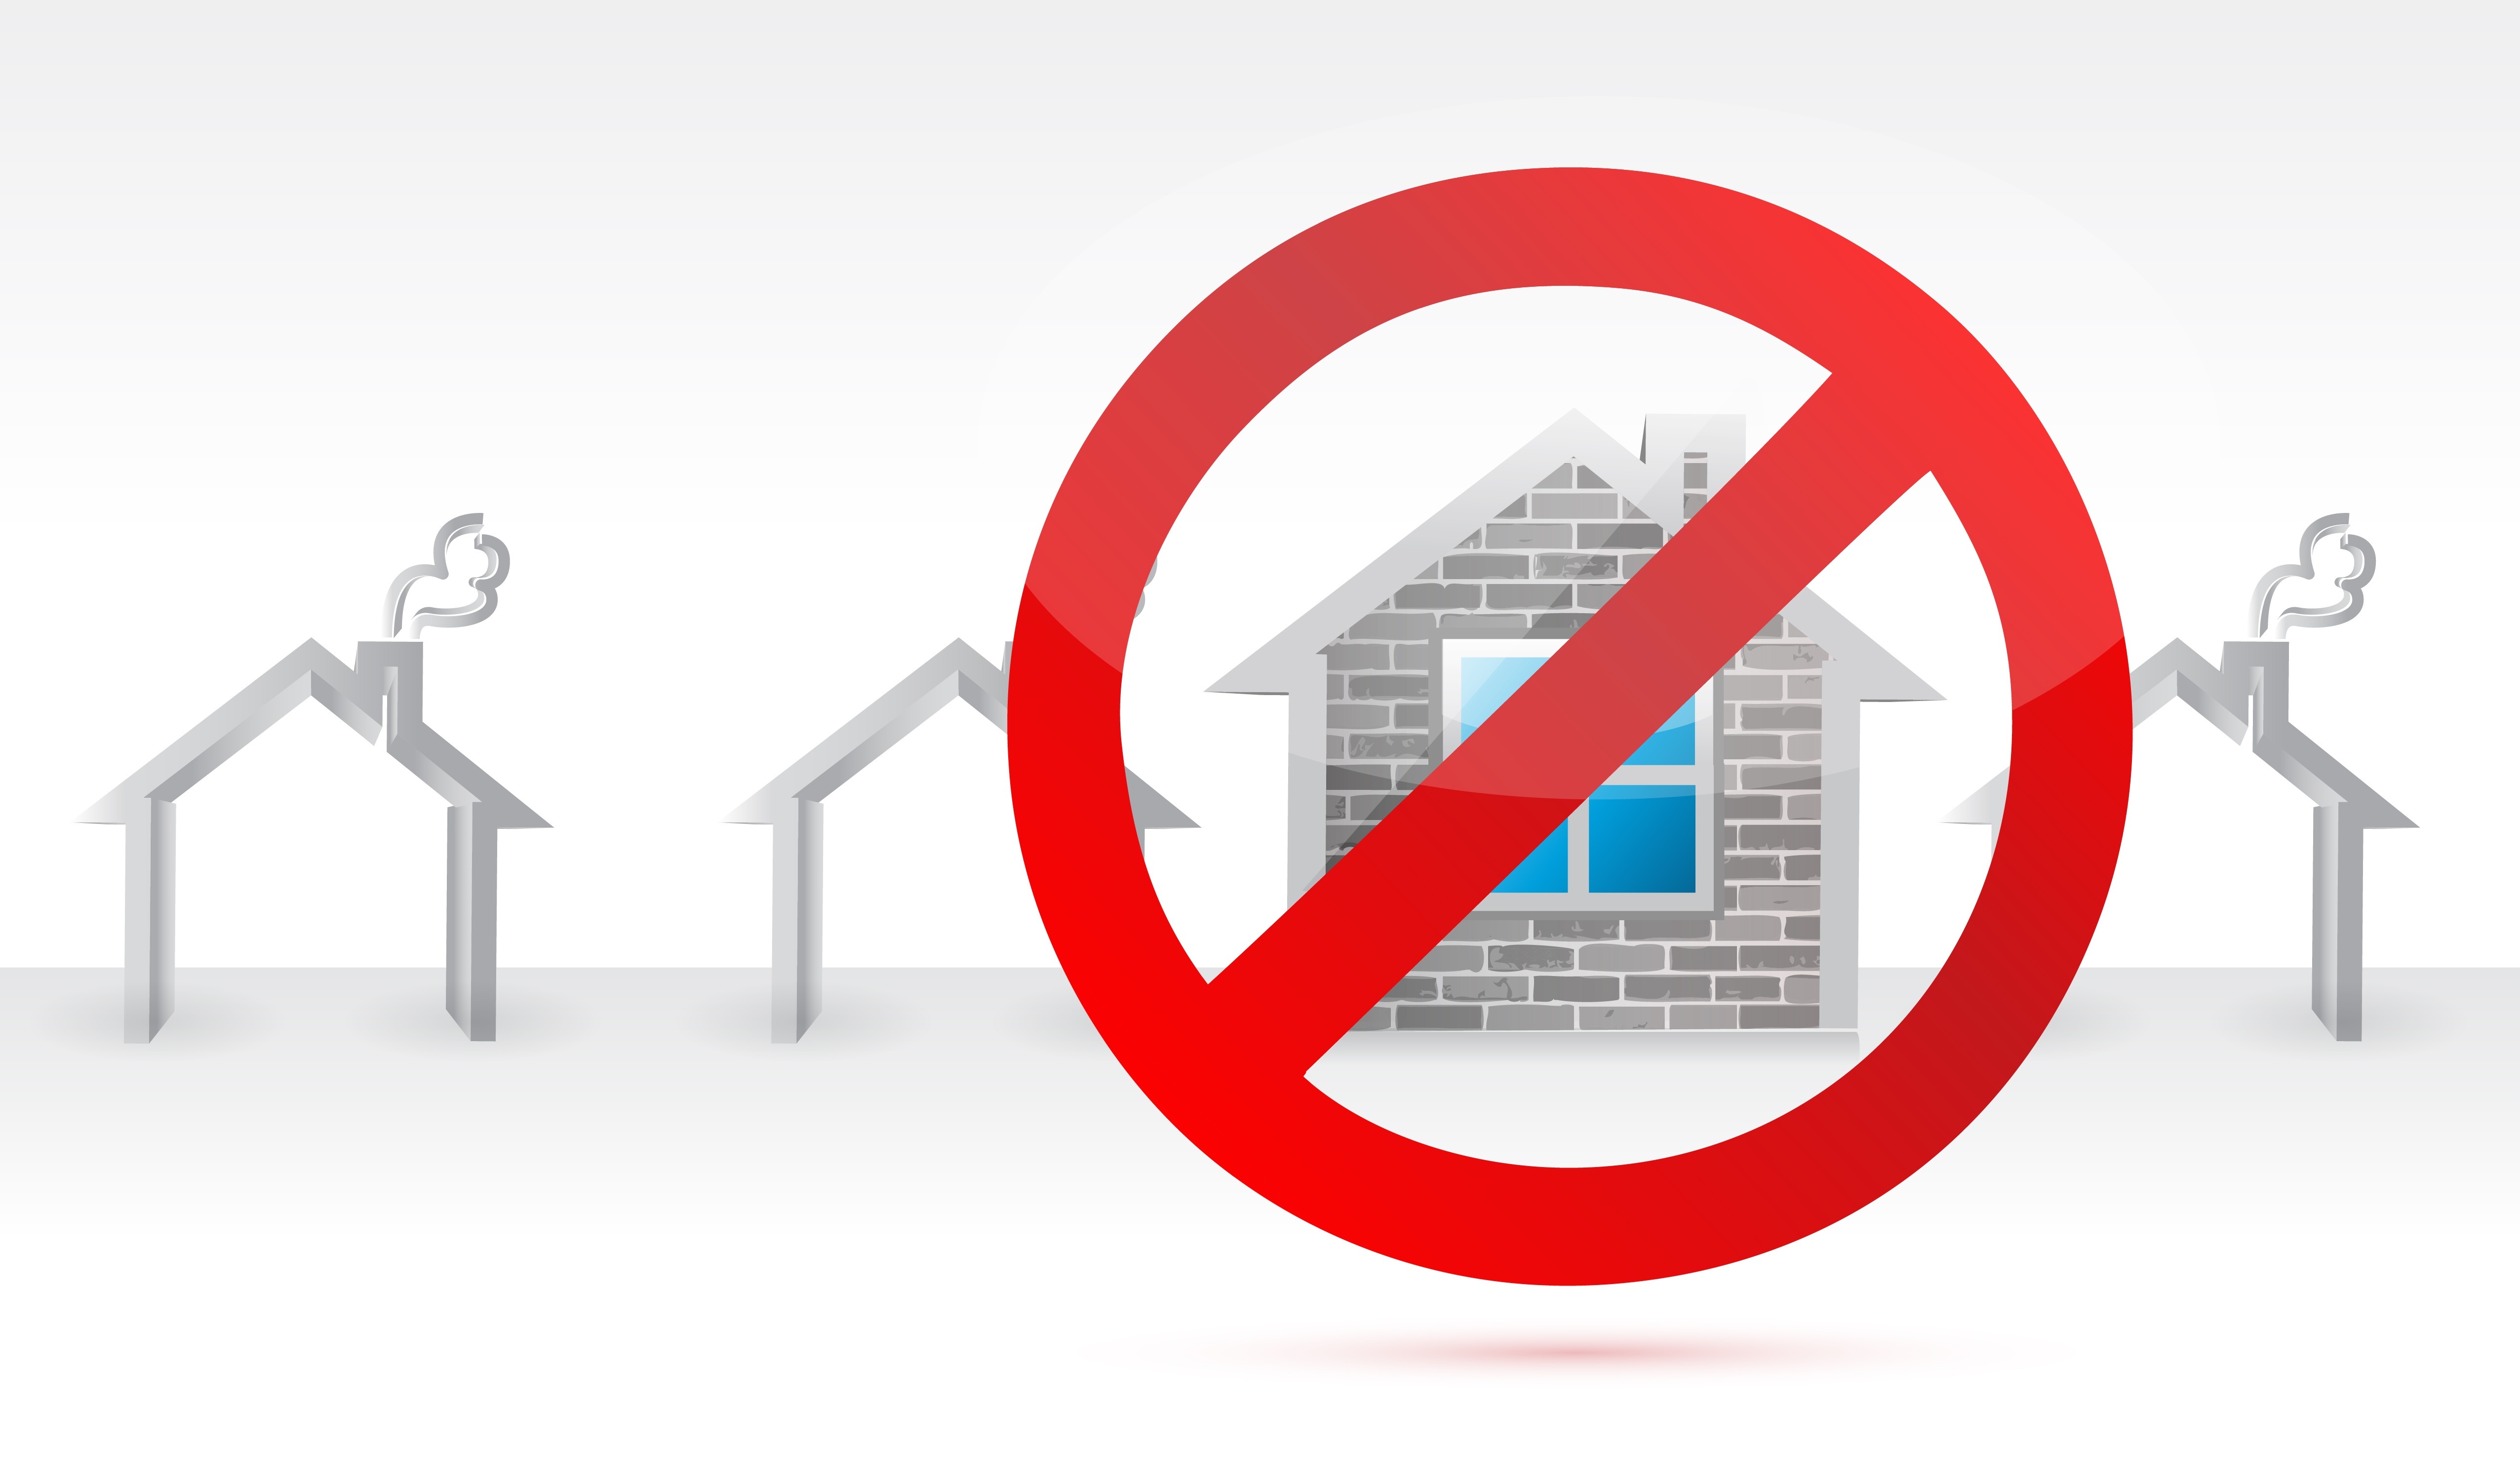 Rookie Mistakes: Don't Make These 4 First-time Home-buyer Mistakes